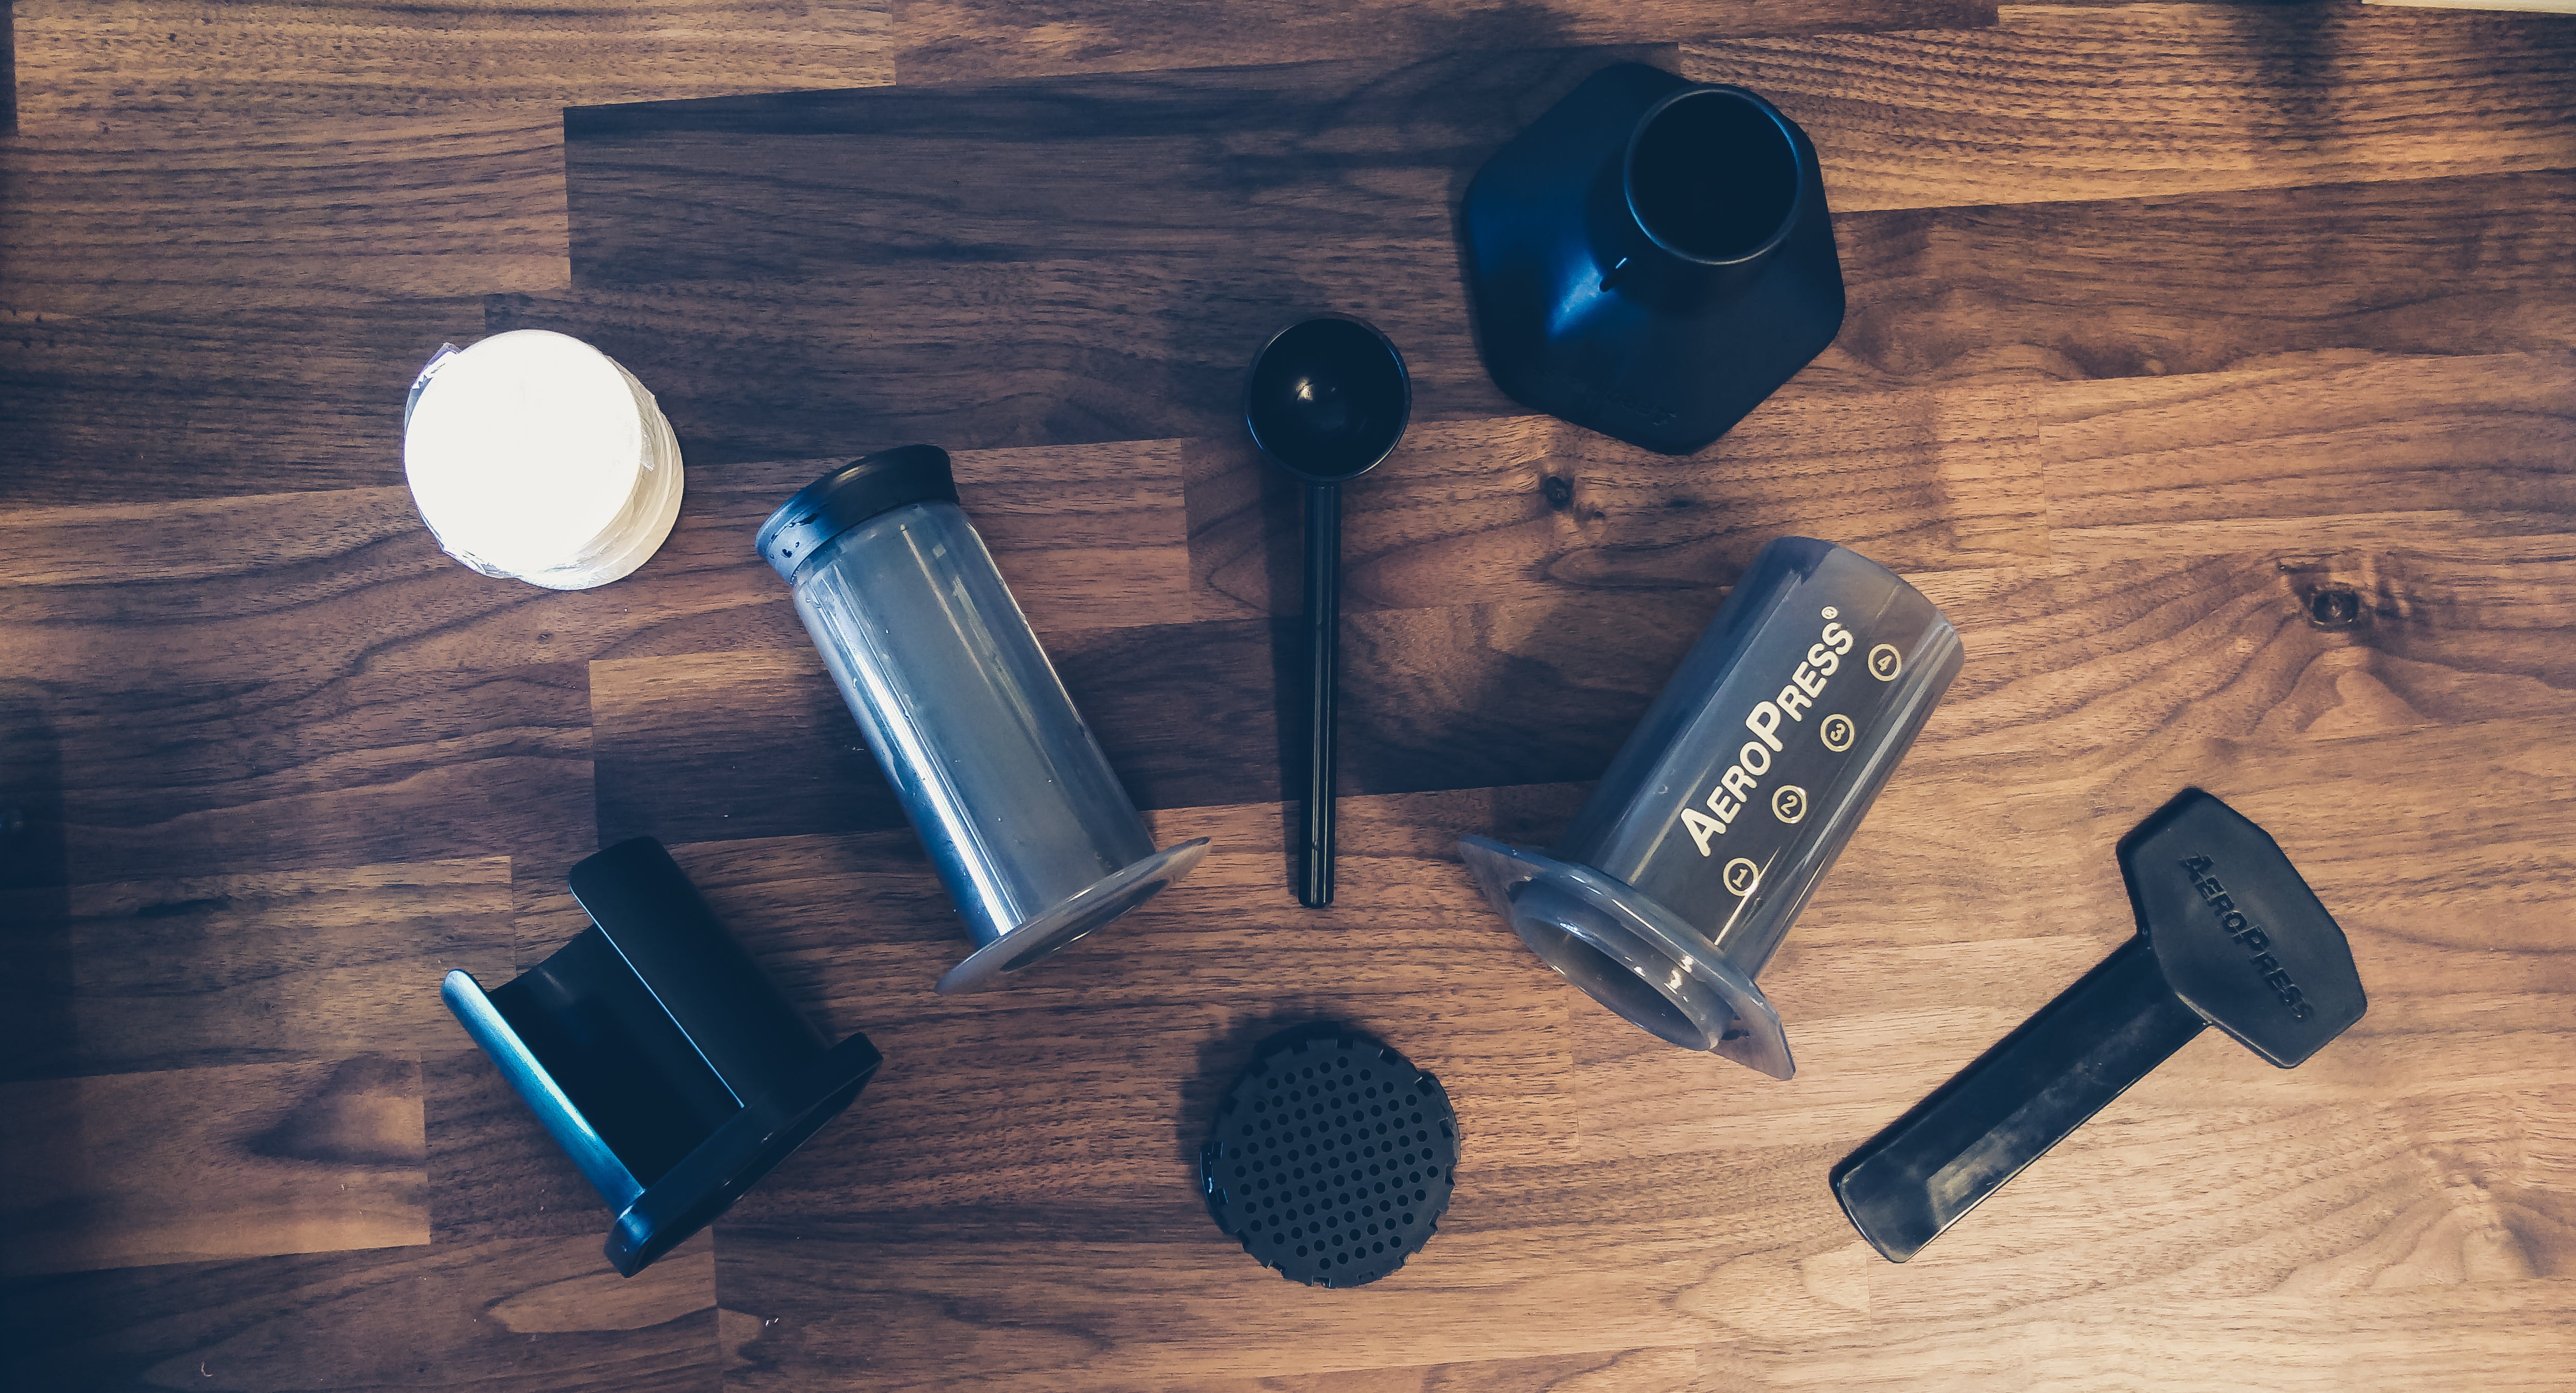 Aeropress Coffee Kit - All parts laid out on display